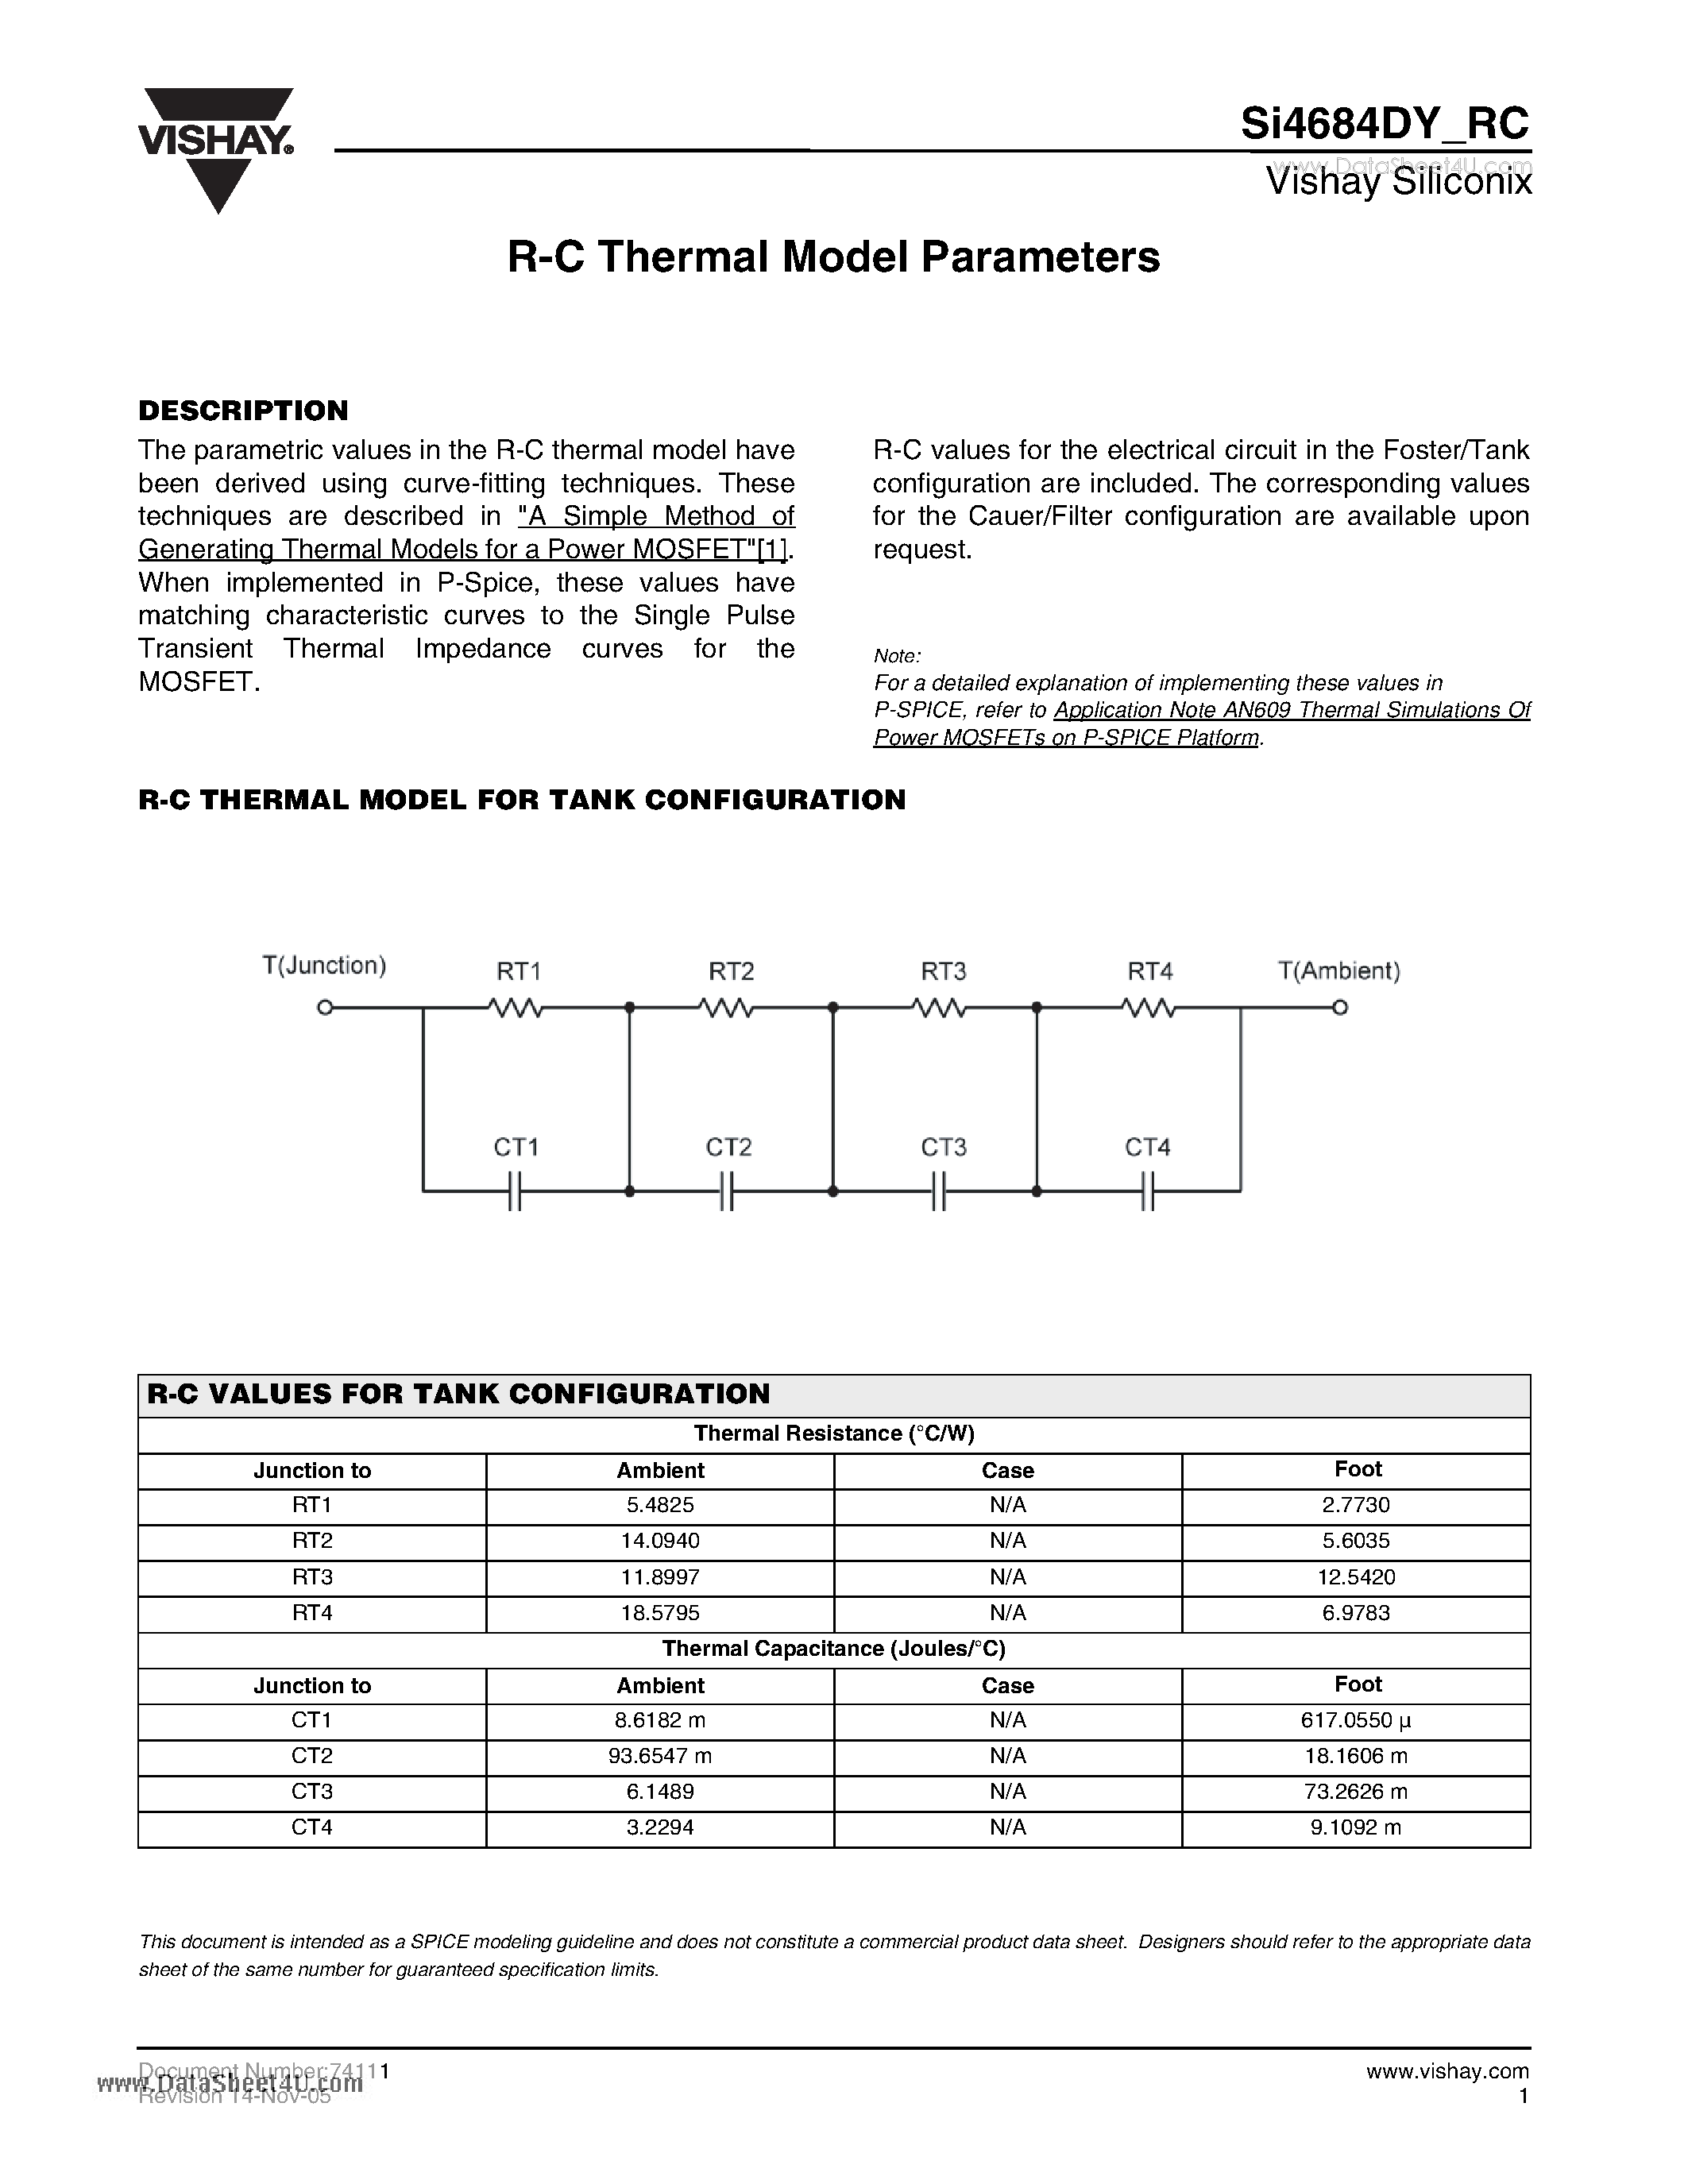 Даташит SI4684DY_RC - R-C Thermal Model Parameters страница 1